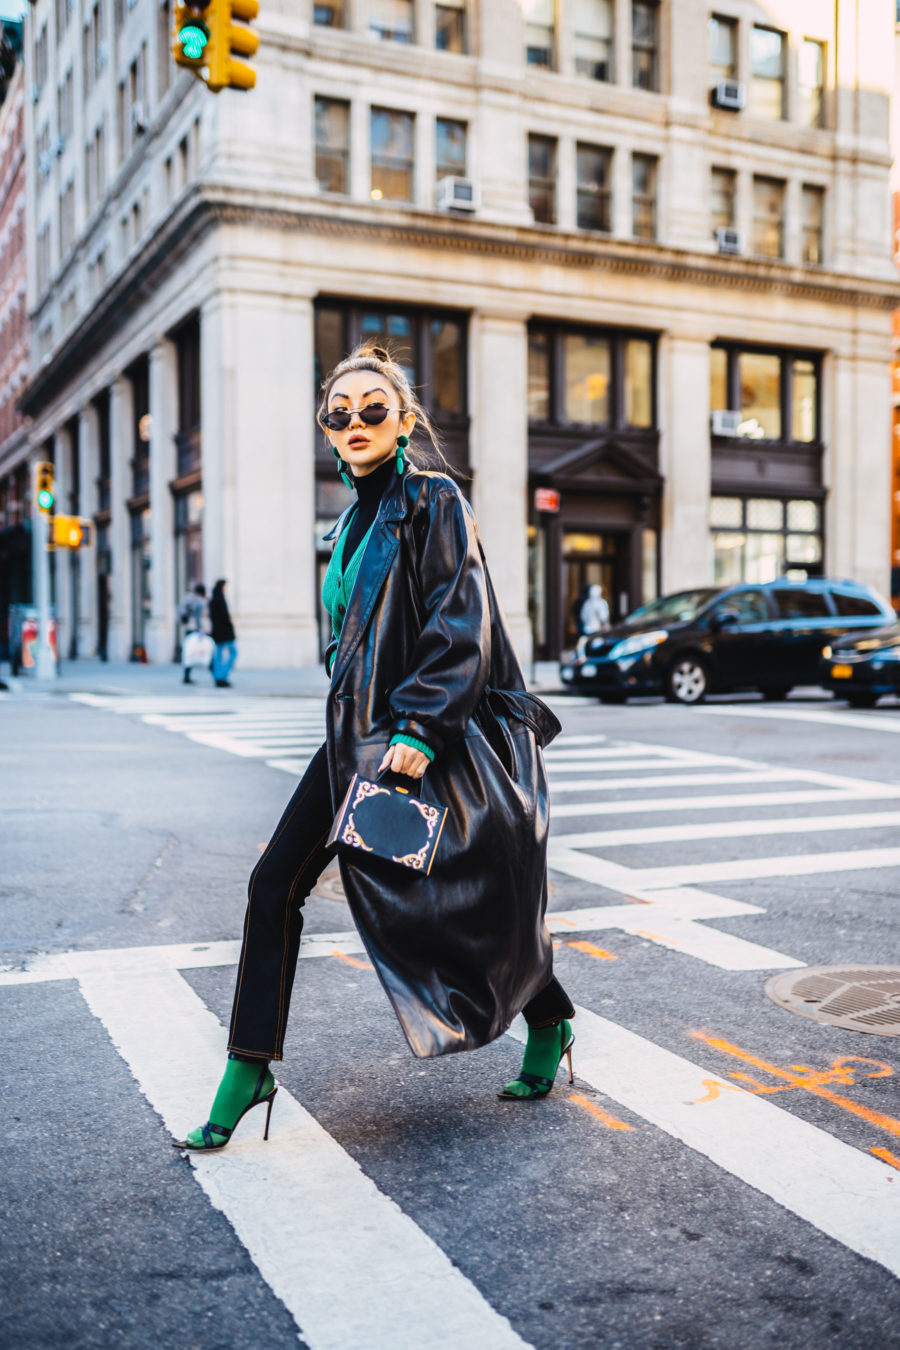 fashion blogger jessica wang shares the best winter coats and wears a leather trench coat with socks and sandals // Notjessfashion.com